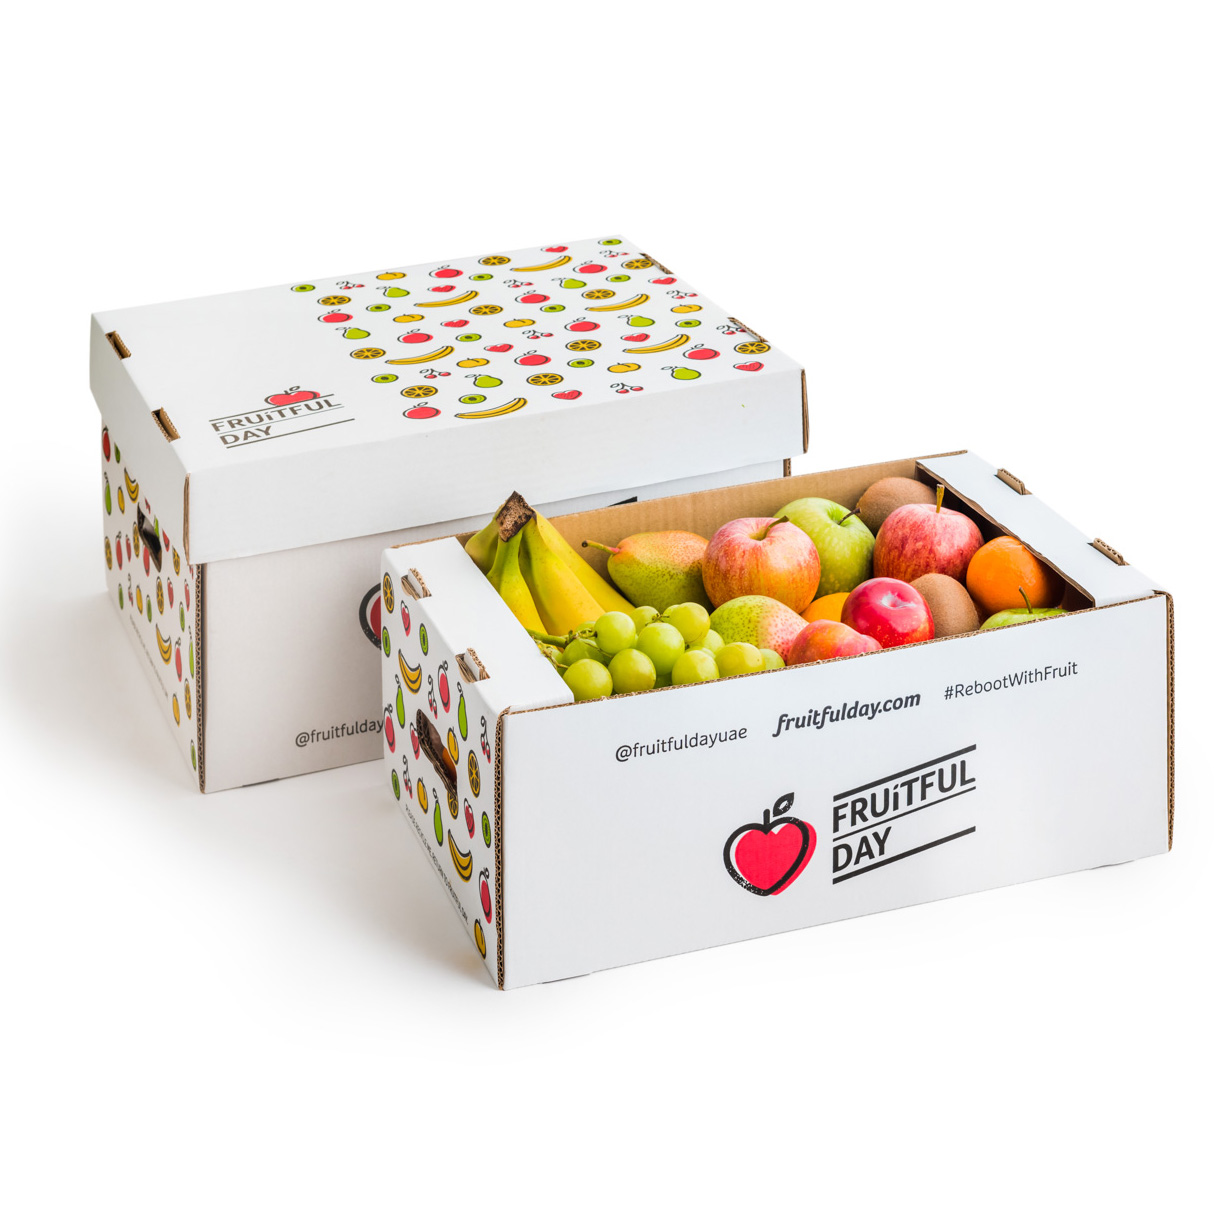 Offset printed vegetable shipping box